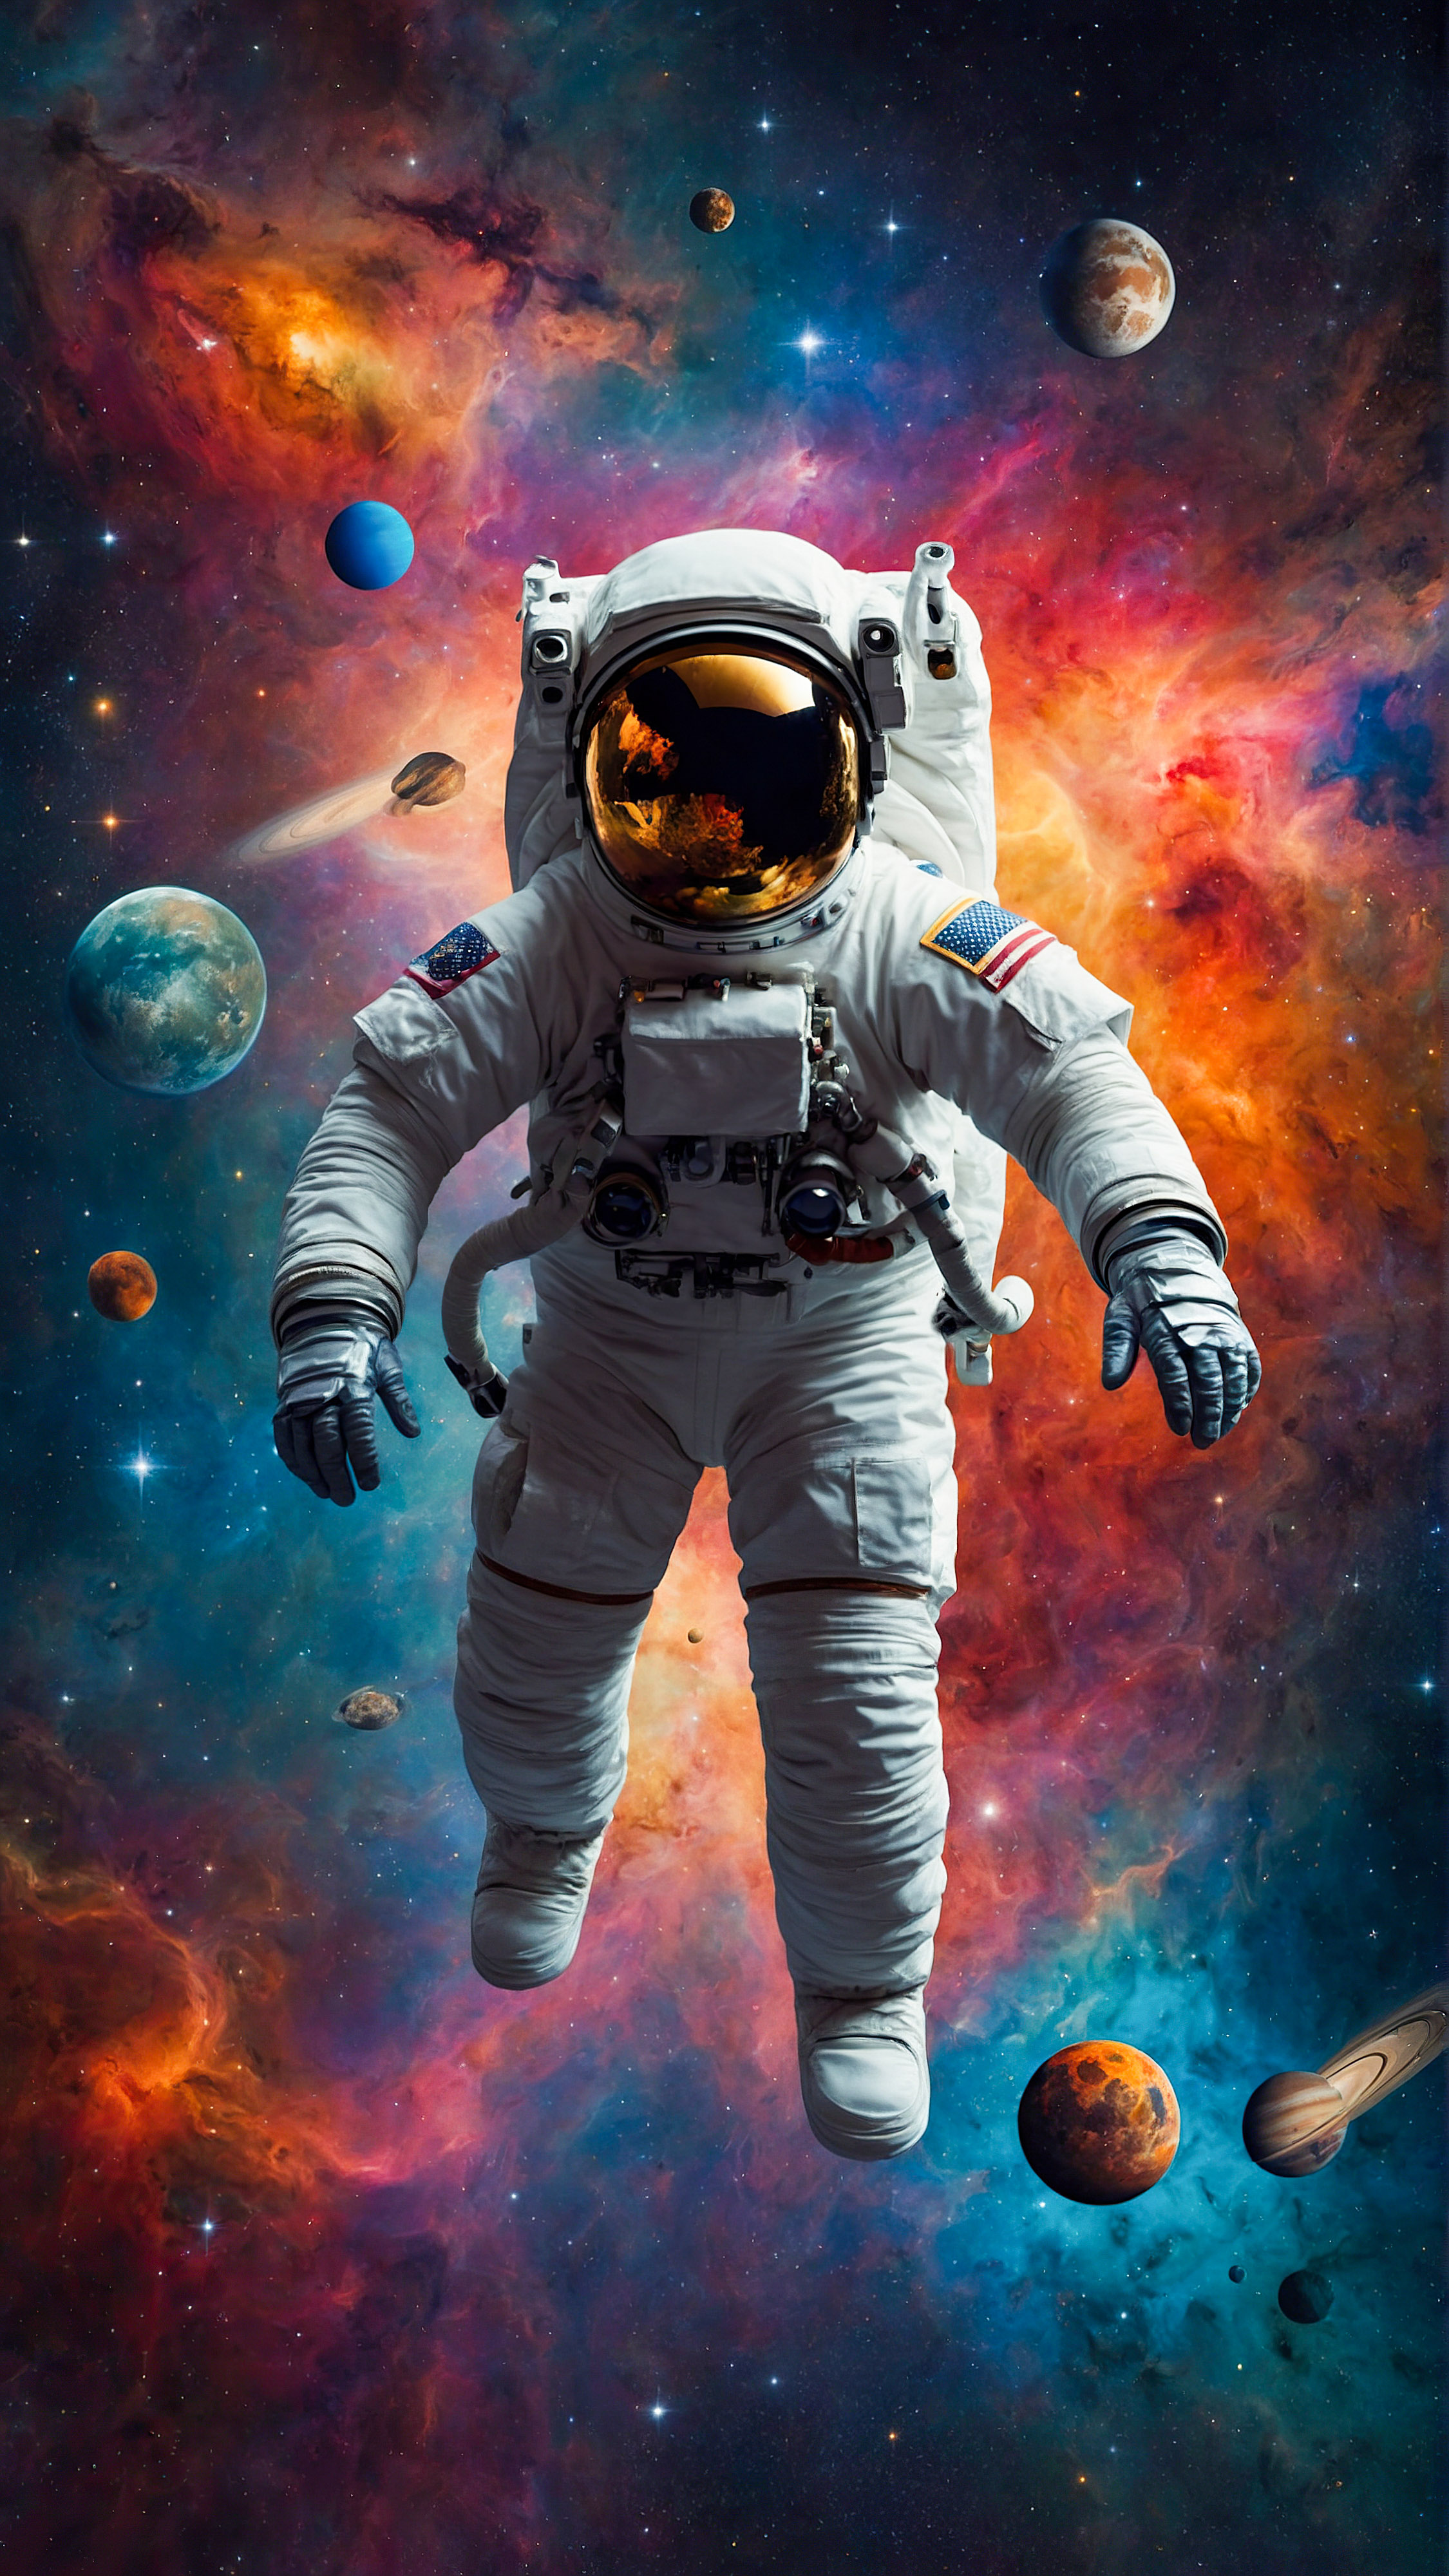 Transform your device’s appearance with our iPhone OLED wallpaper, a collage-style artwork of an astronaut surrounded by various colorful celestial bodies and shapes against a starry space background.